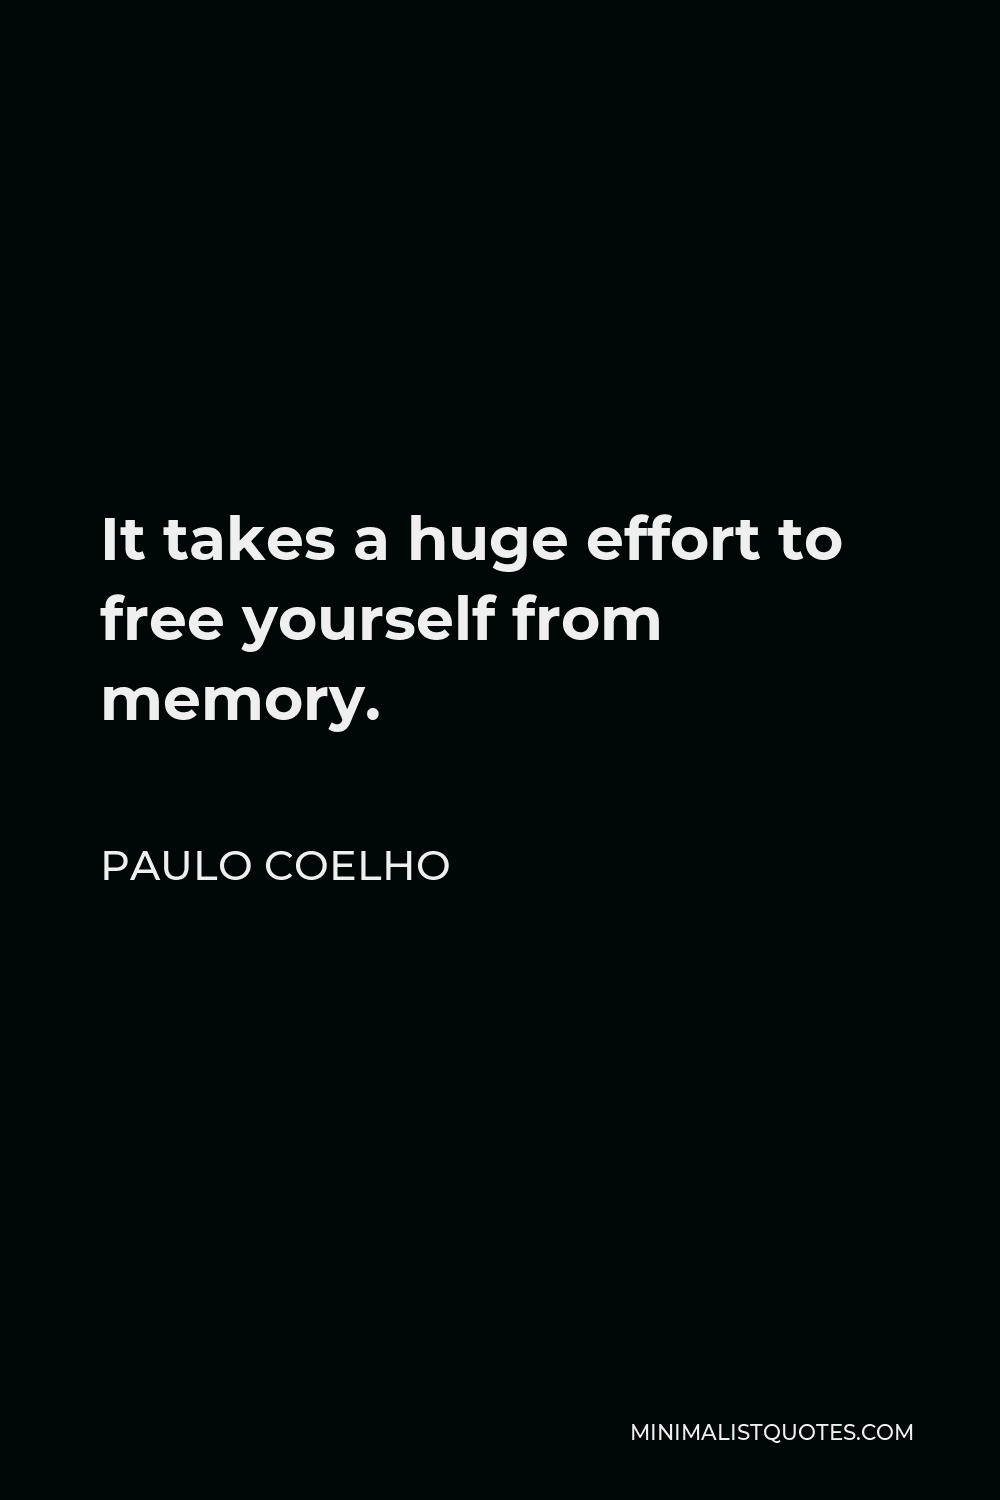 Paulo Coelho Quote It Takes A Huge Effort To Free Yourself From Memory